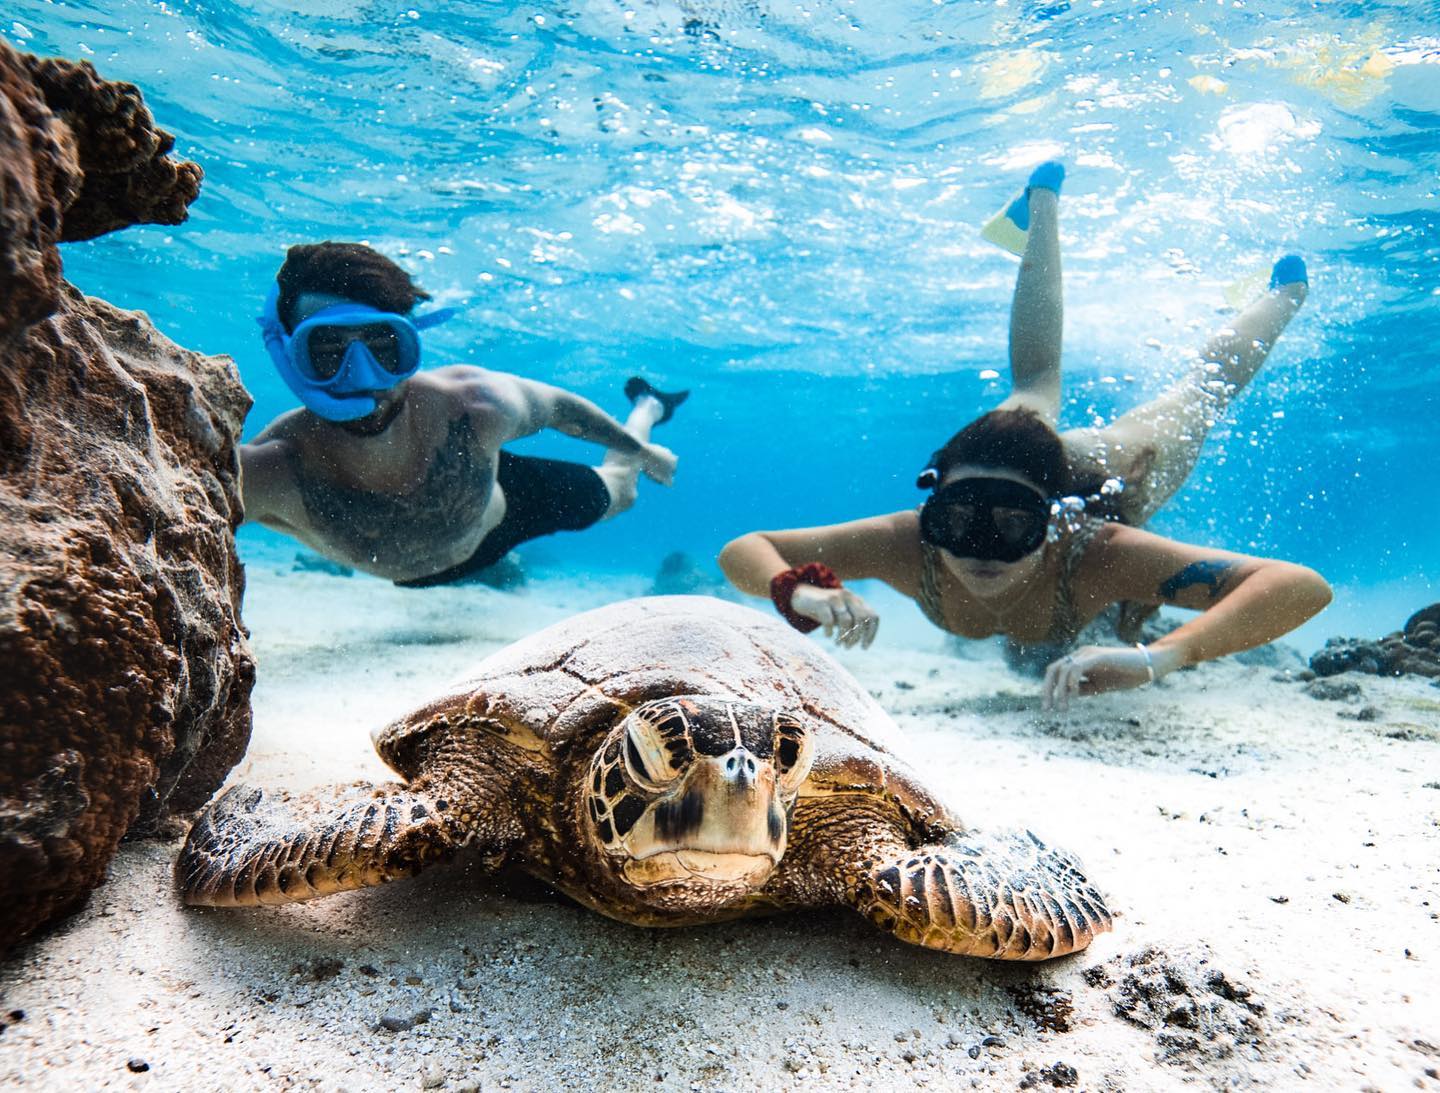 Taking a dive into safety: Turtle tour operators sign MOU to enhance safety and sustainability